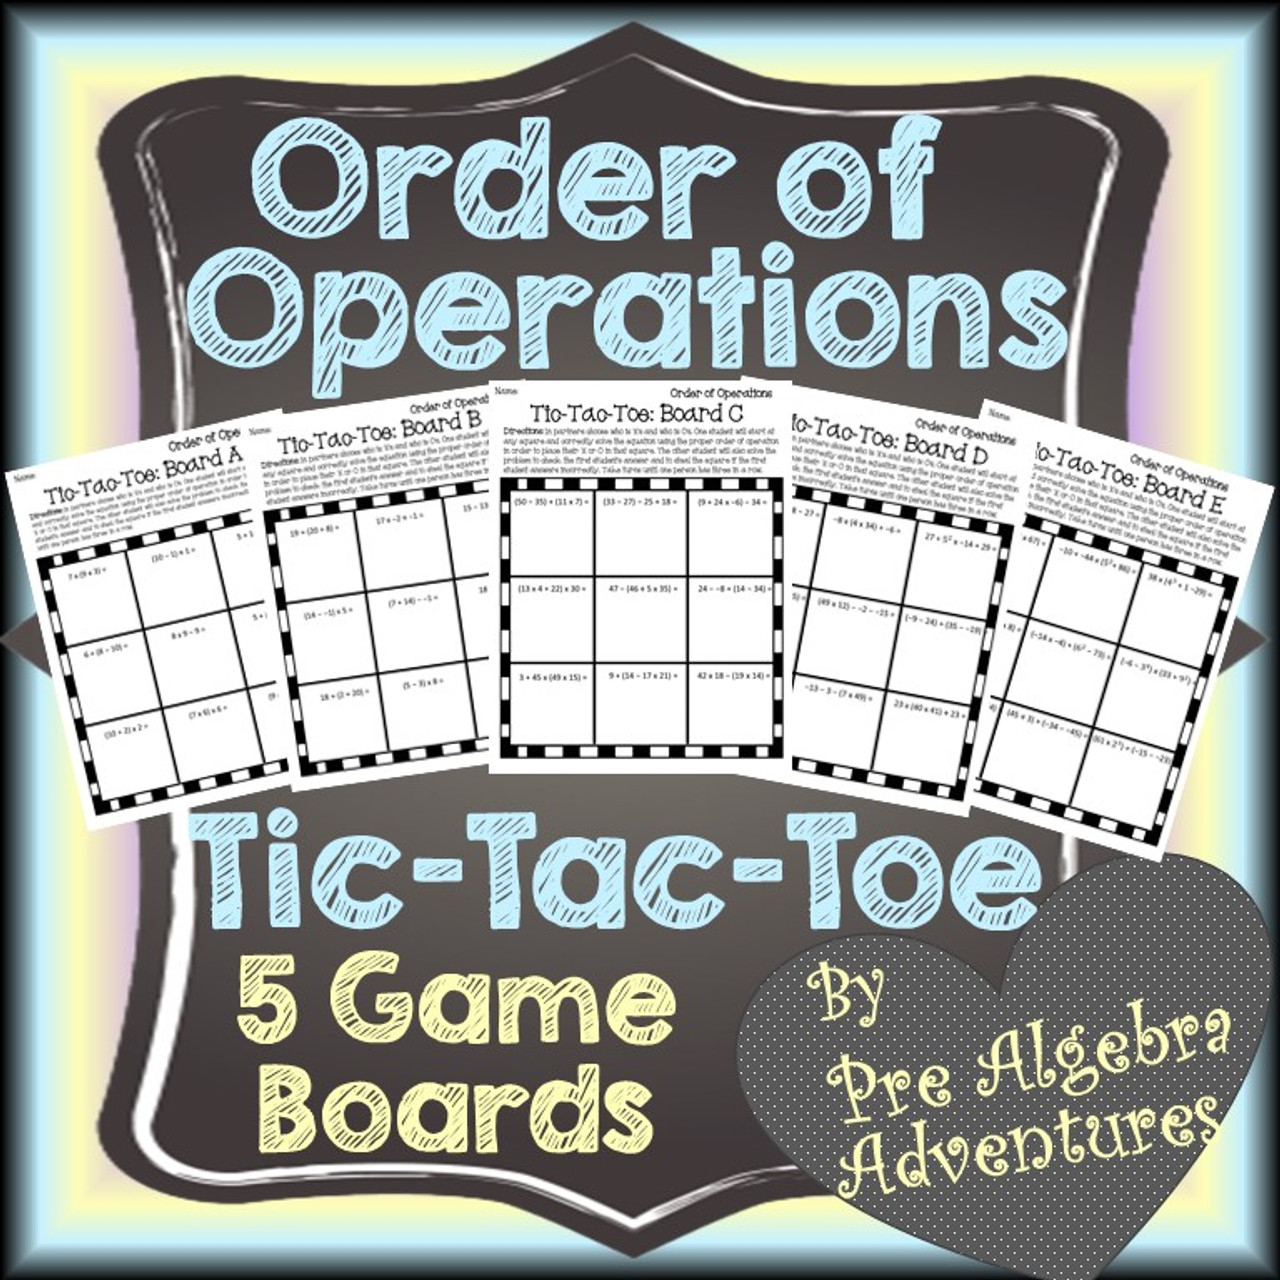 Order of Operations Tic Tac Toe Game